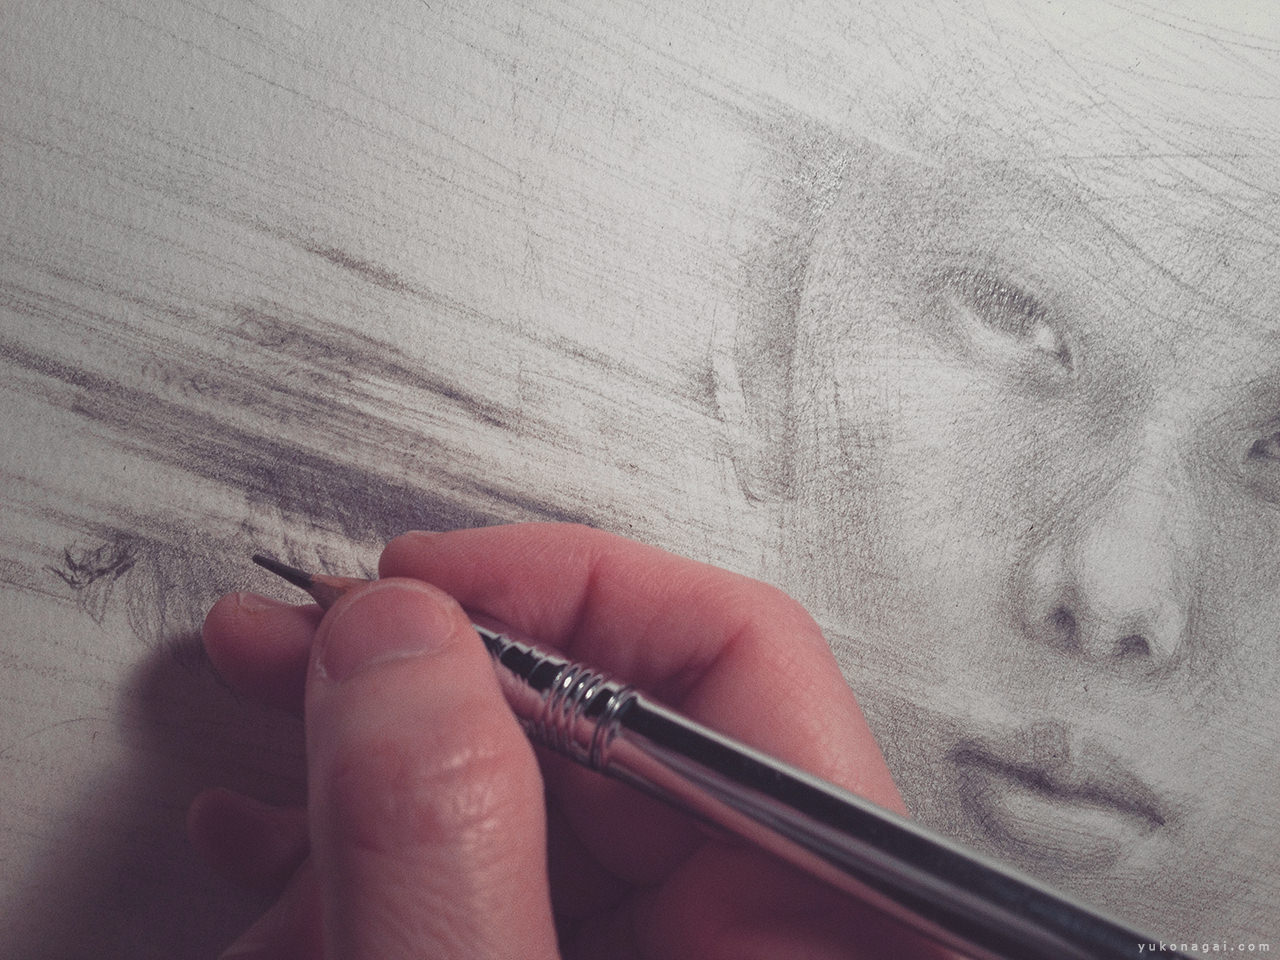 A child portrait in progress and an artist's hand holding a pencil.